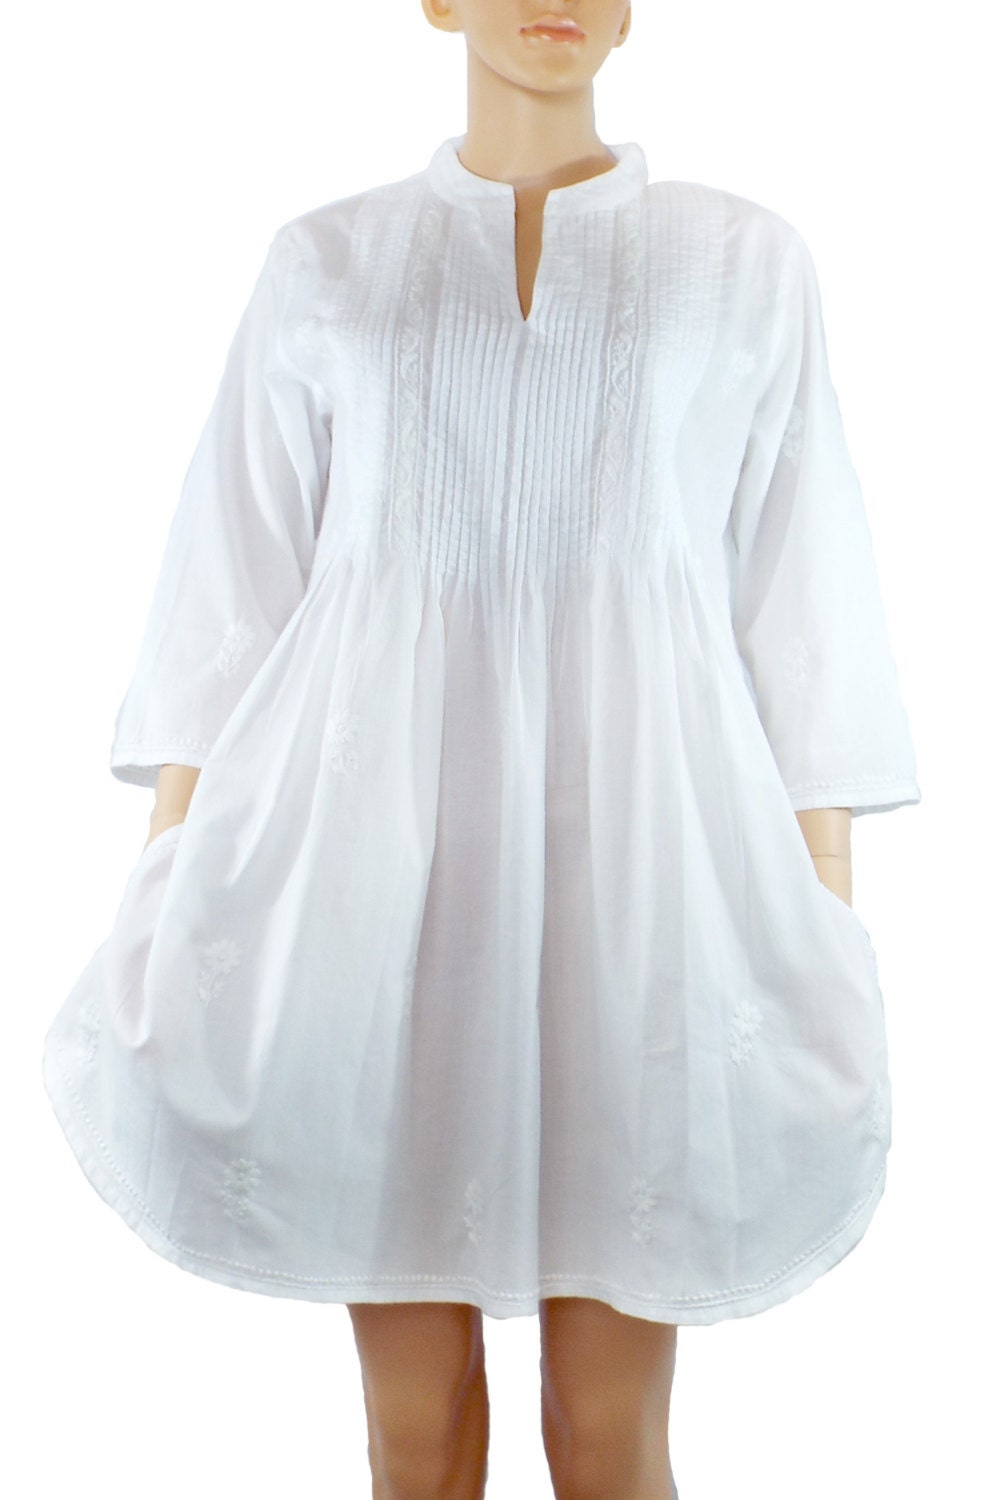 Hand Embroidered White Cotton Tunic by GemmayaCouture on Etsy